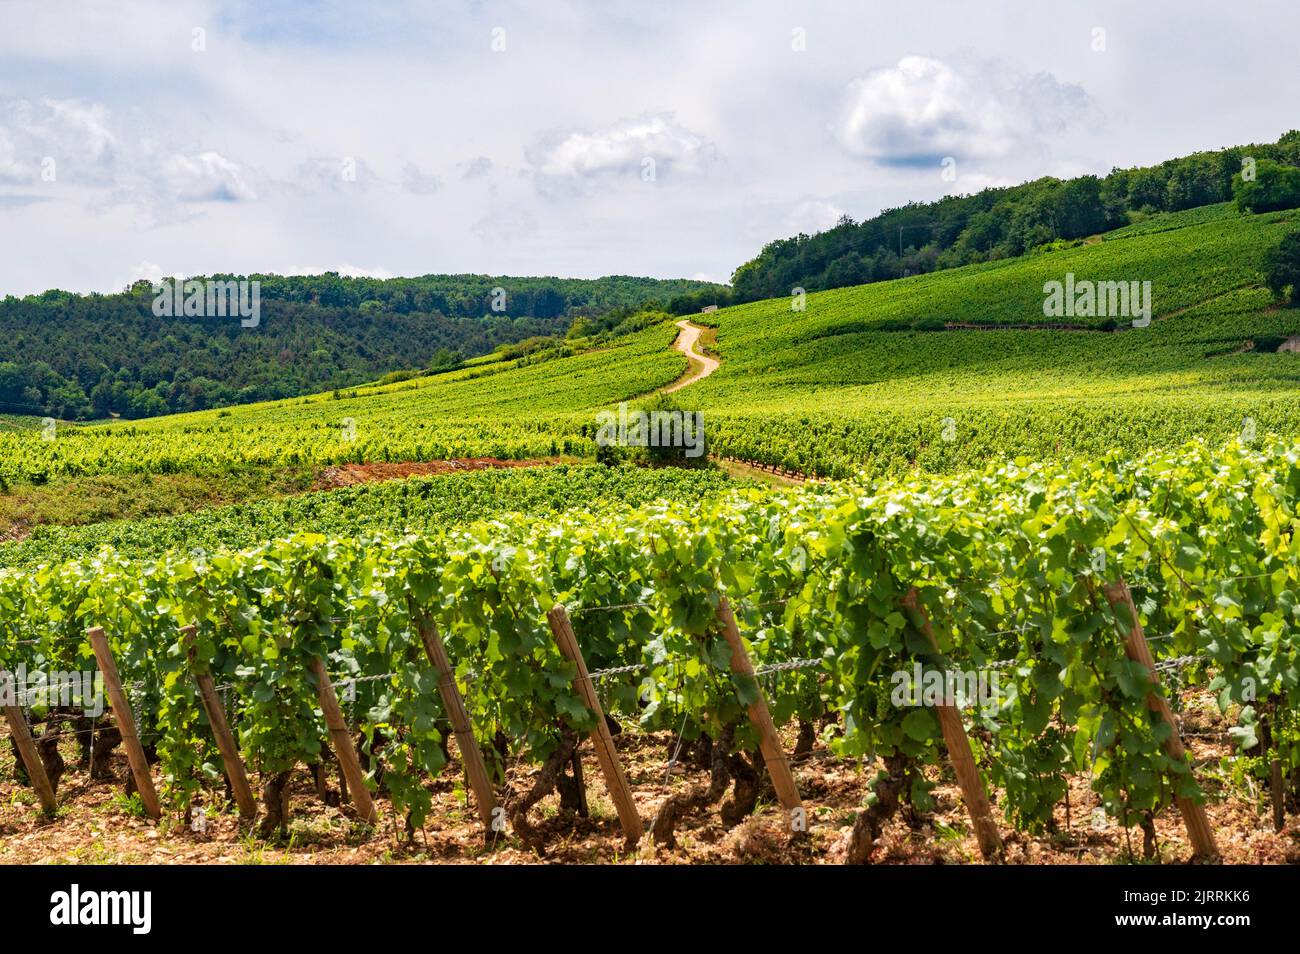 A vineyard near the formerly Cistercensian winery Clos de Vougeot ,one of the most renowned winer ies in Burgundy, France Stock Photo